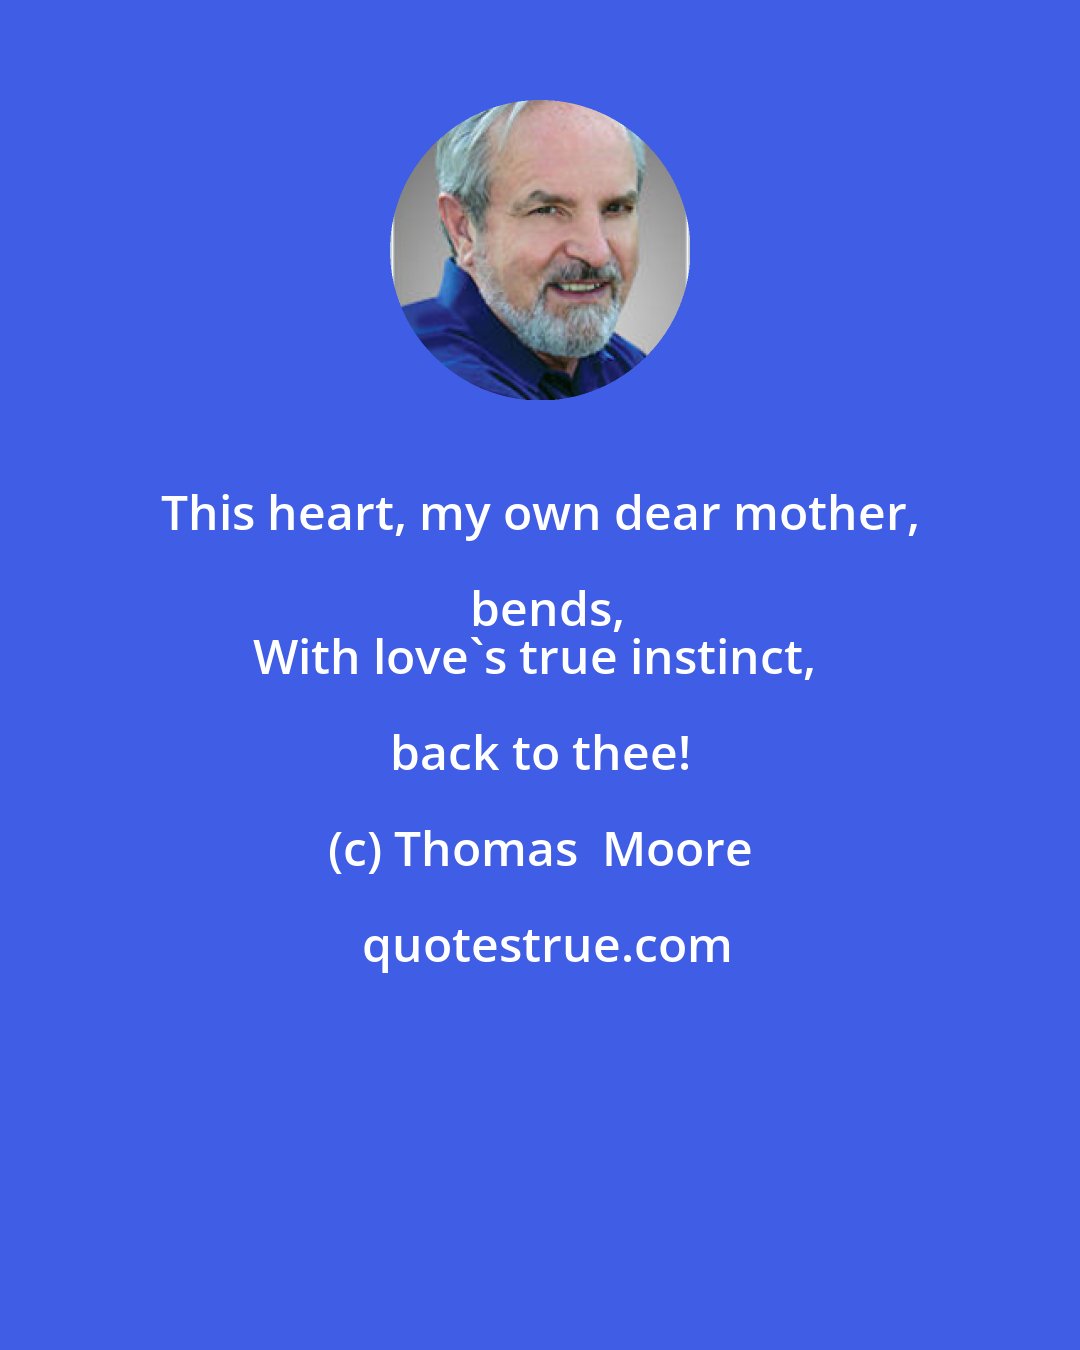 Thomas  Moore: This heart, my own dear mother, bends,
With love's true instinct, back to thee!